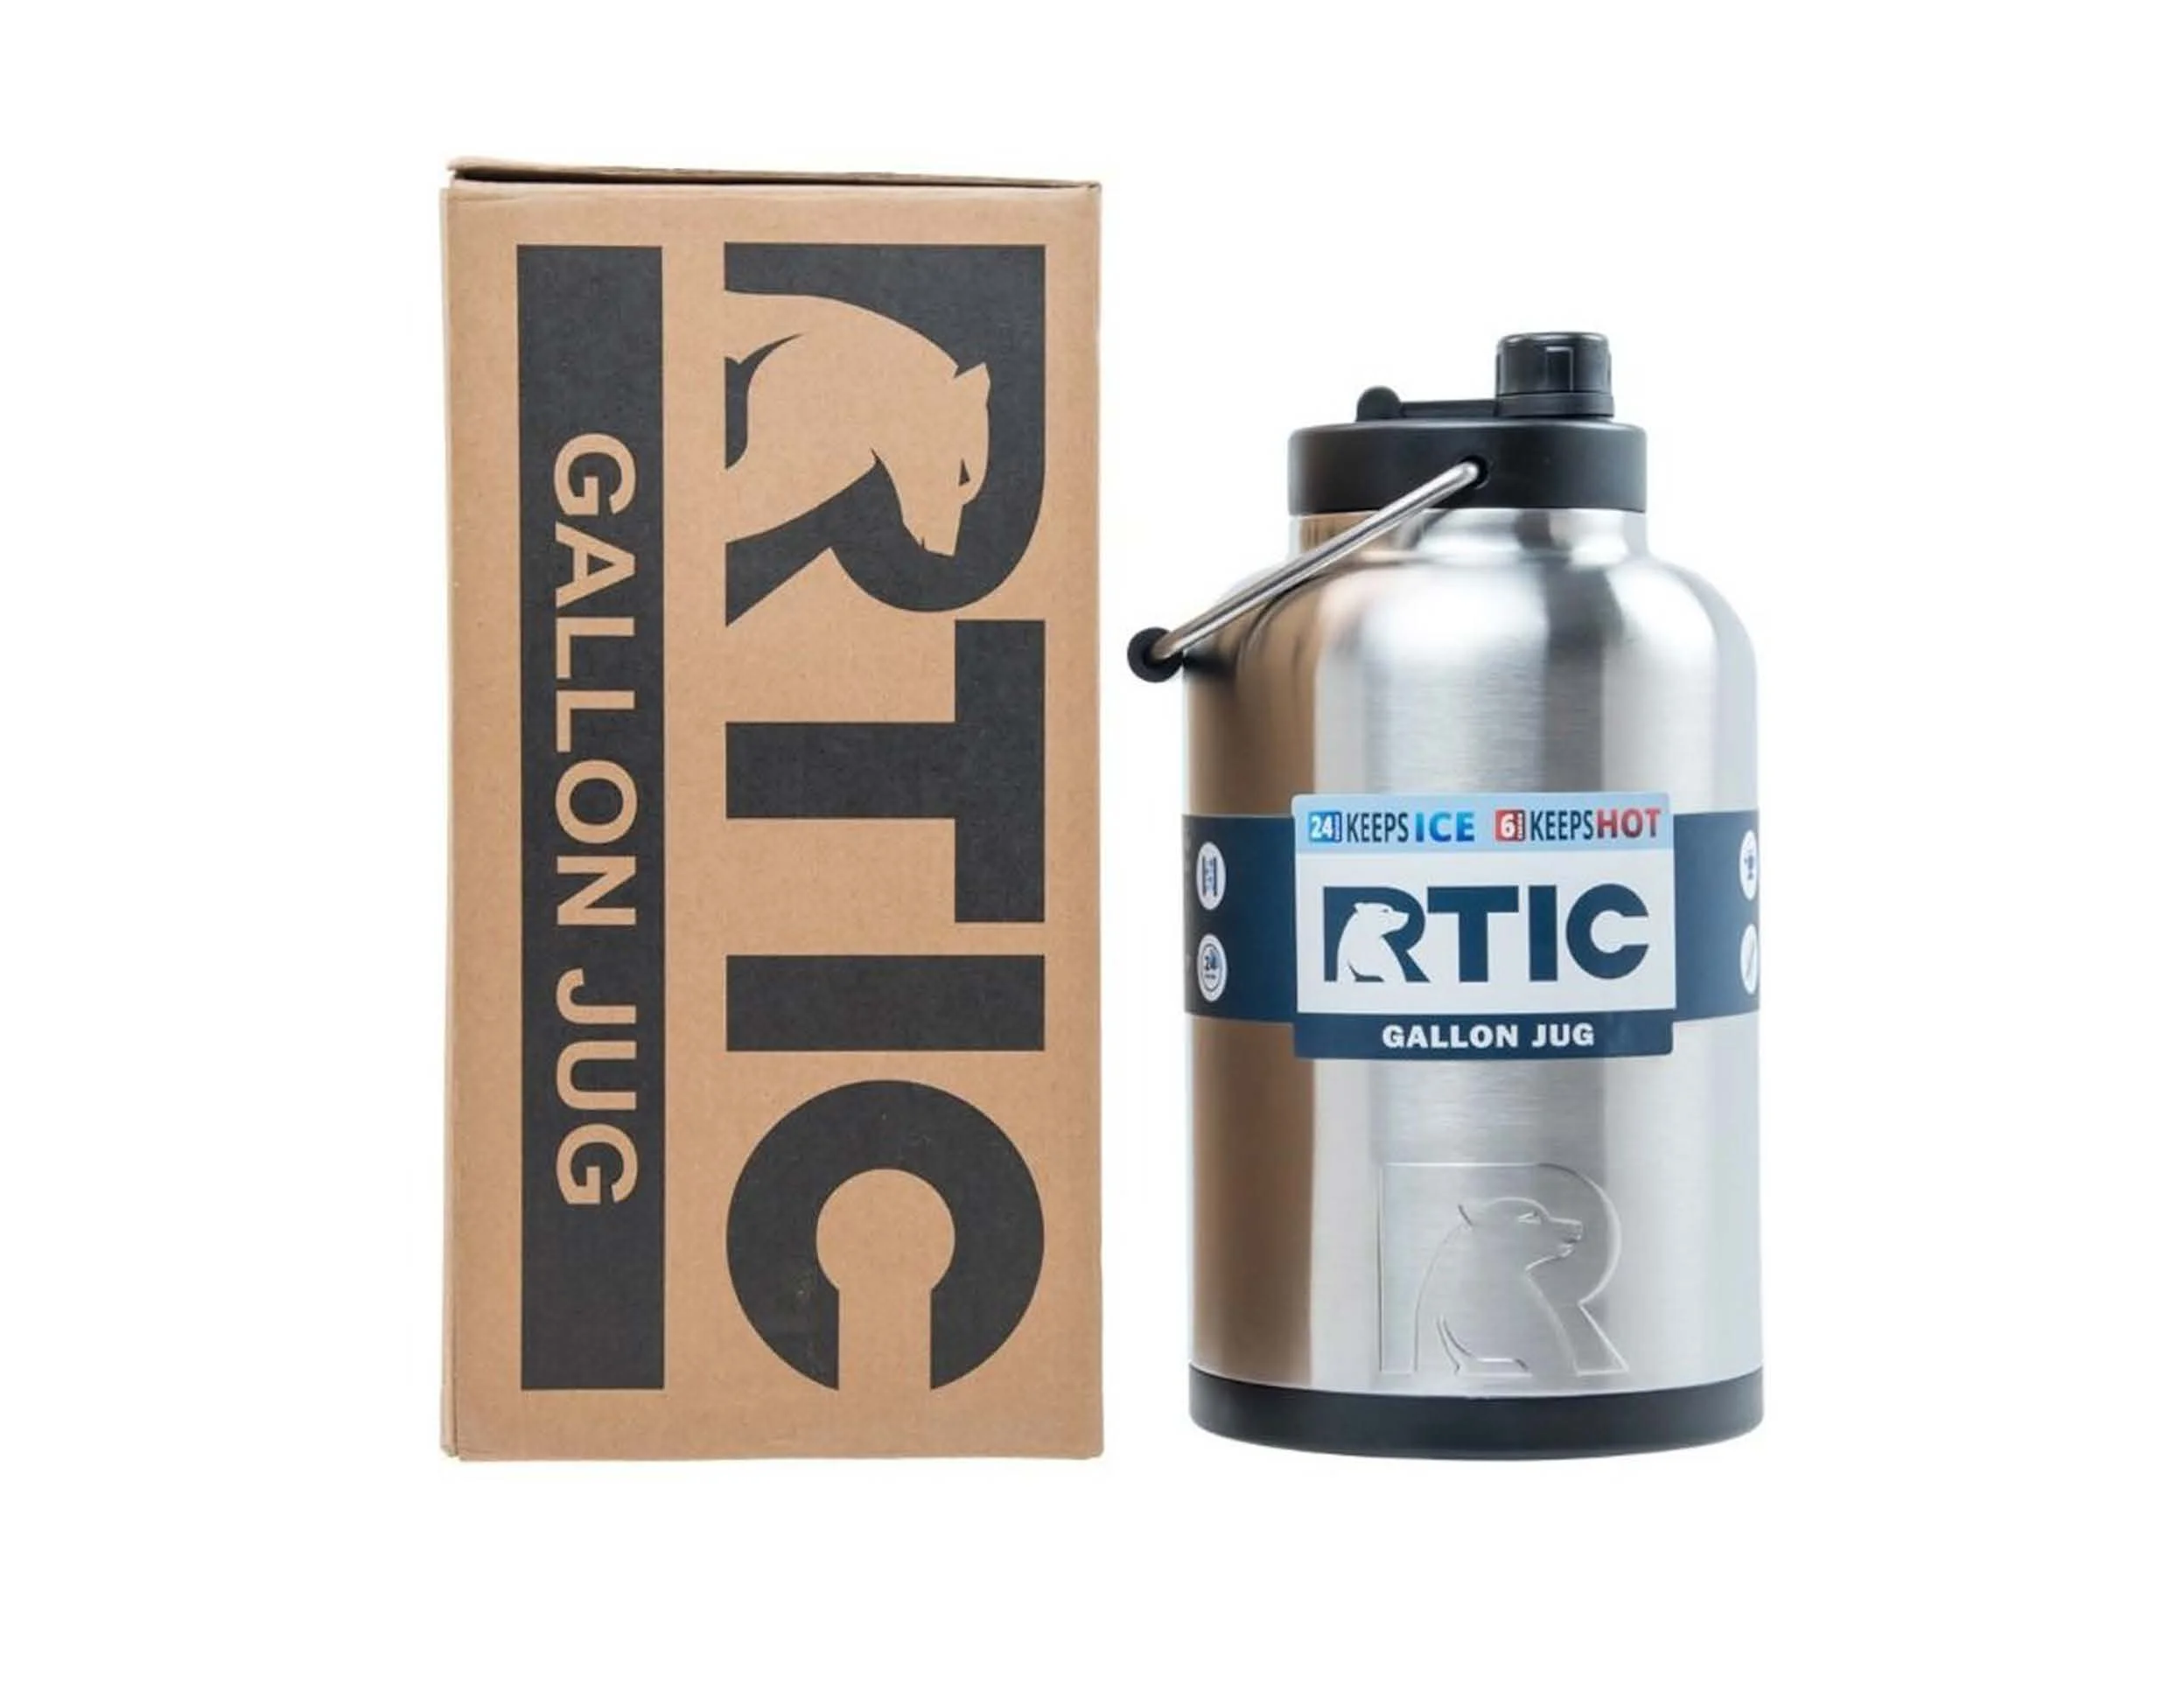 RTIC Gallon Jug and packaging